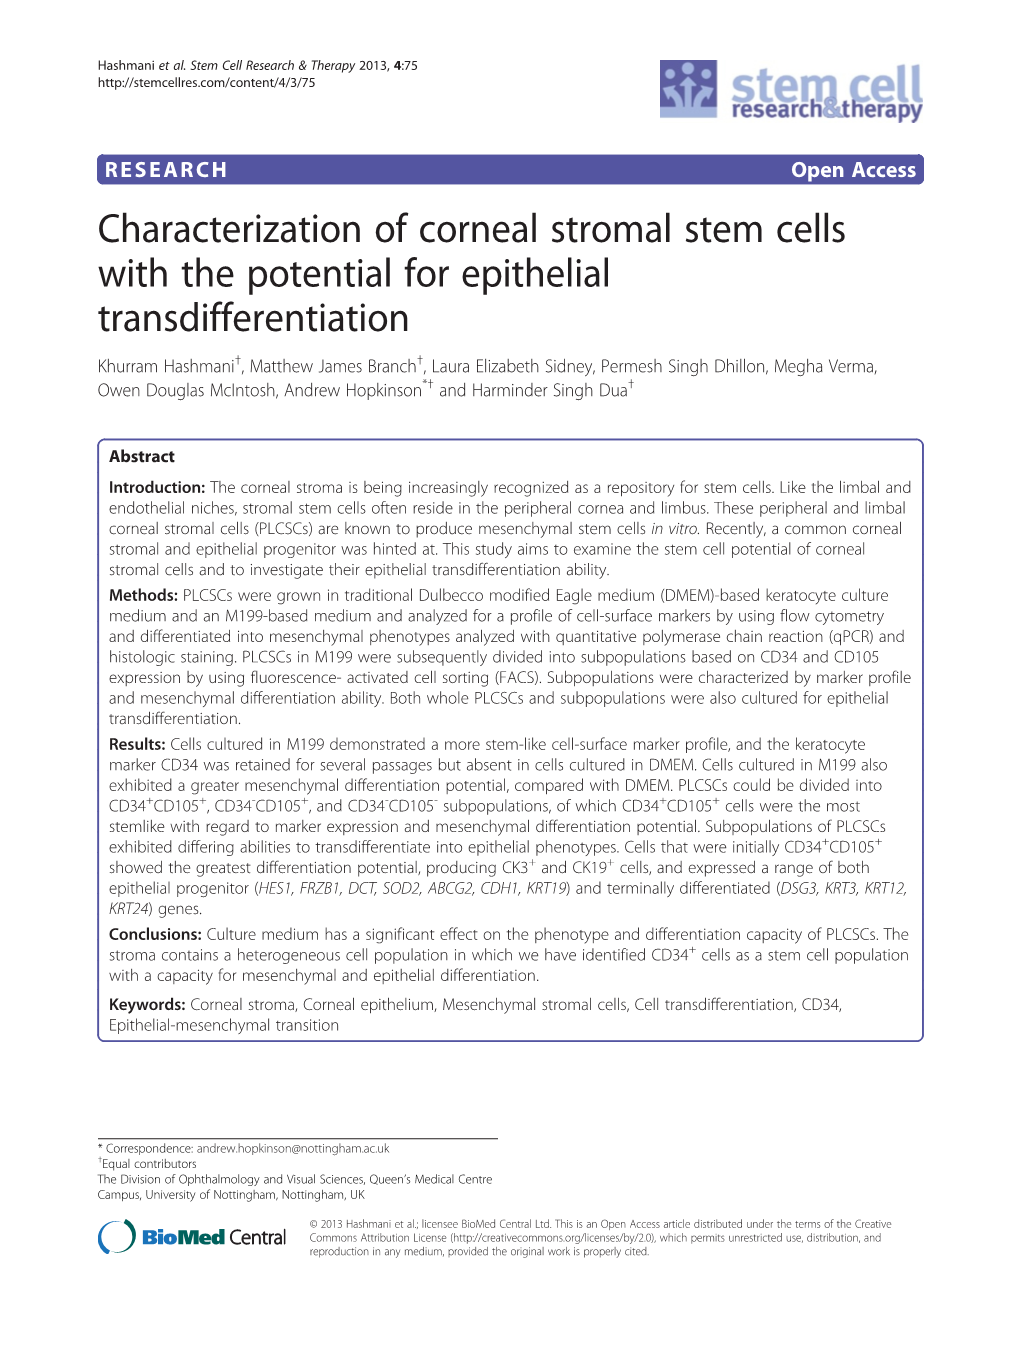 Characterization of Corneal Stromal Stem Cells with the Potential For